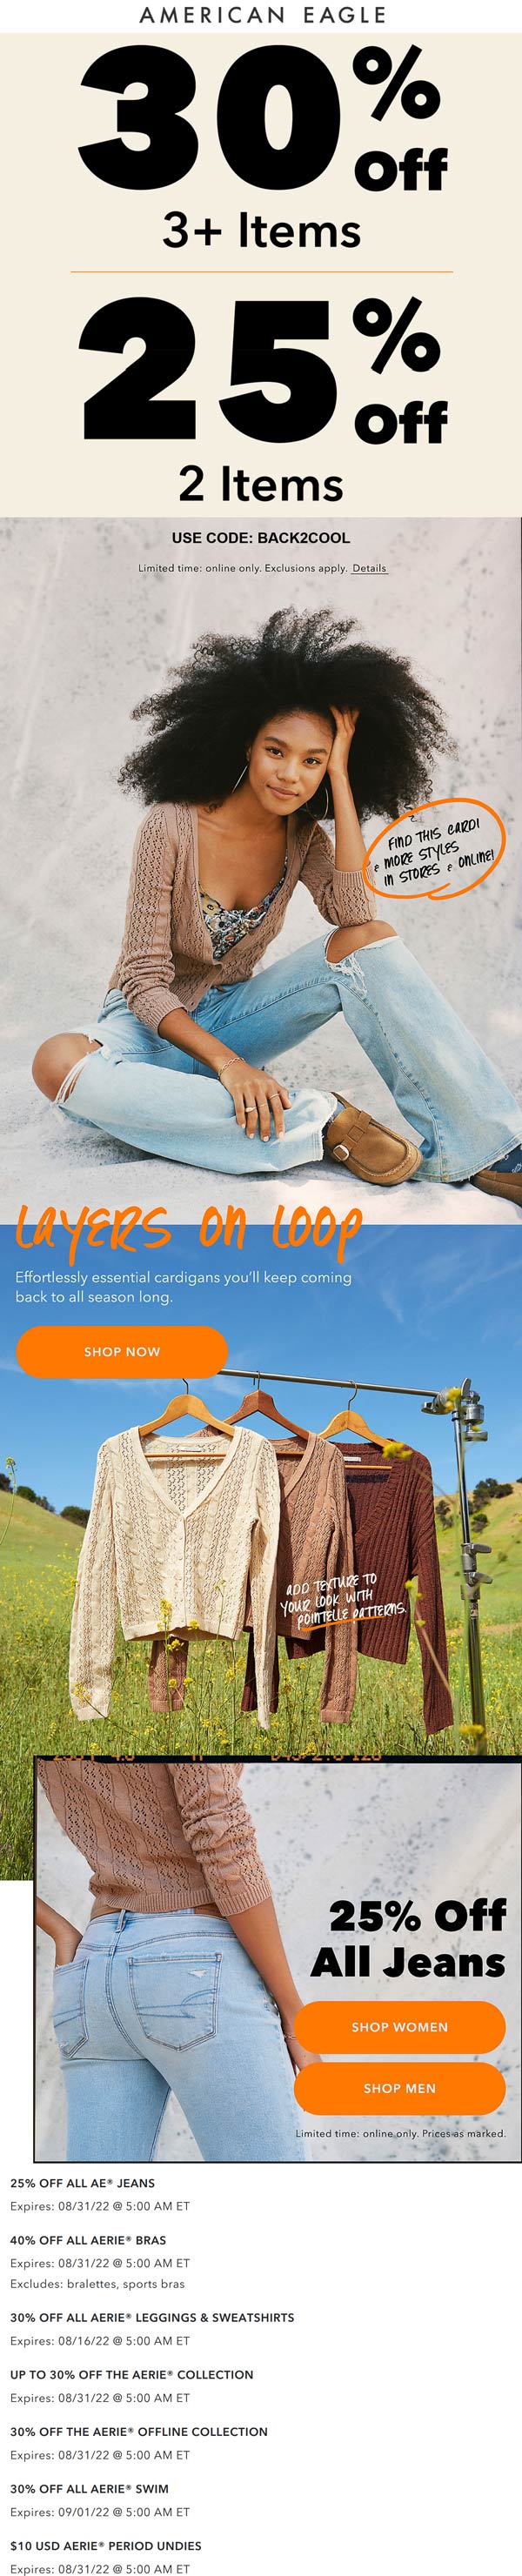 American Eagle stores Coupon  25-30% off 2+ items & all jeans at American Eagle via promo code BACK2COOL #americaneagle 